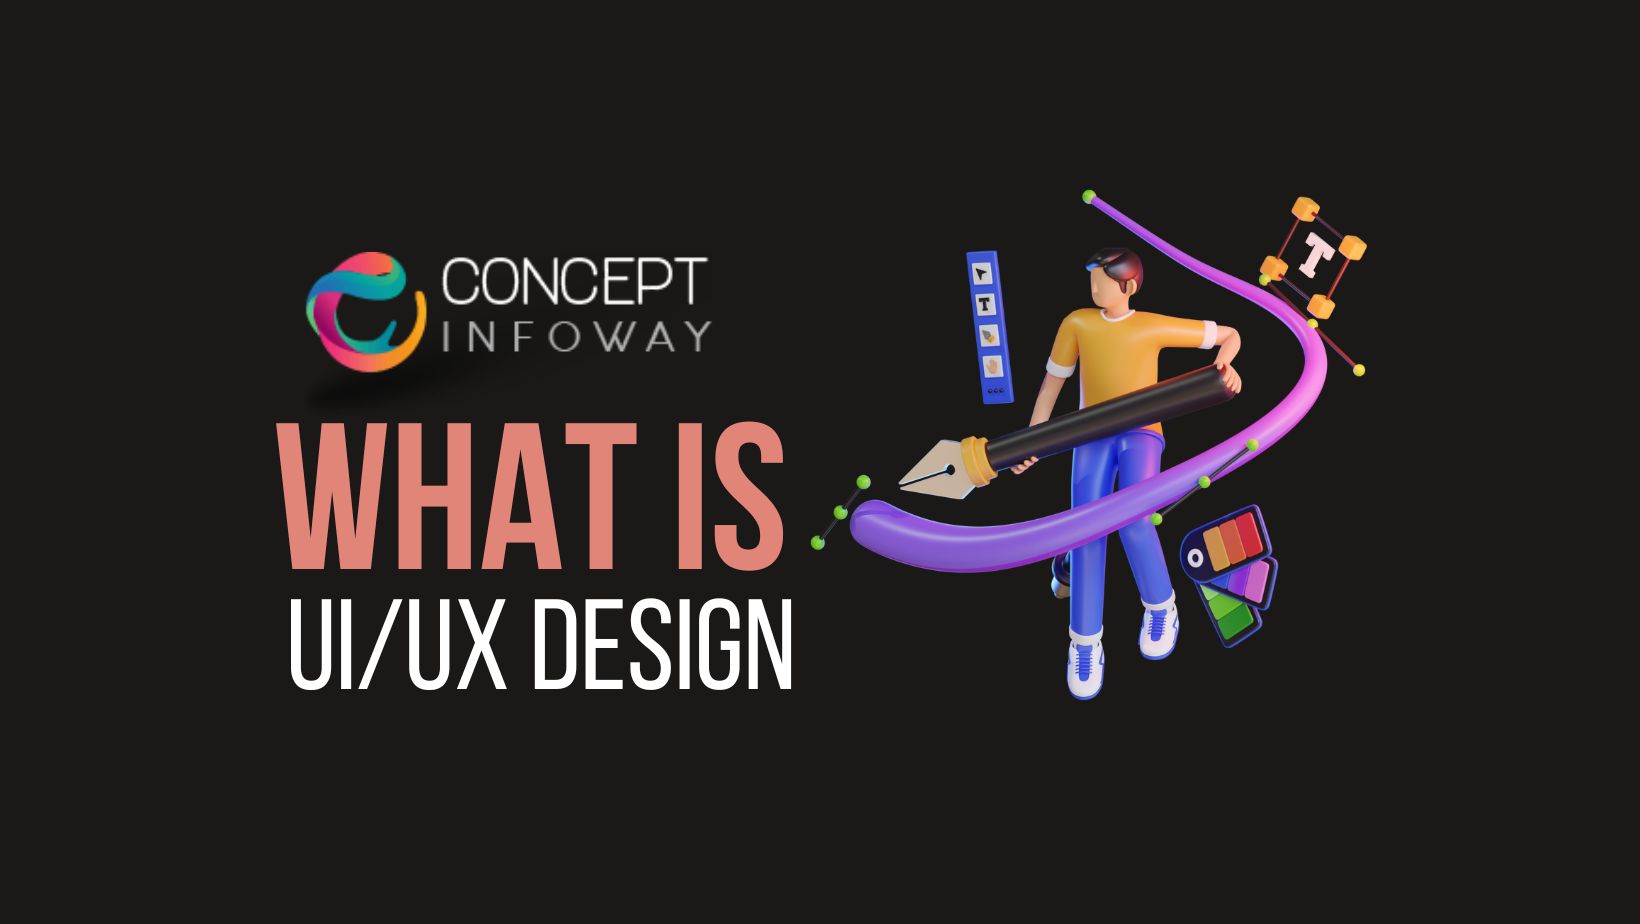 What is UI/UX Design - Concept Infoway